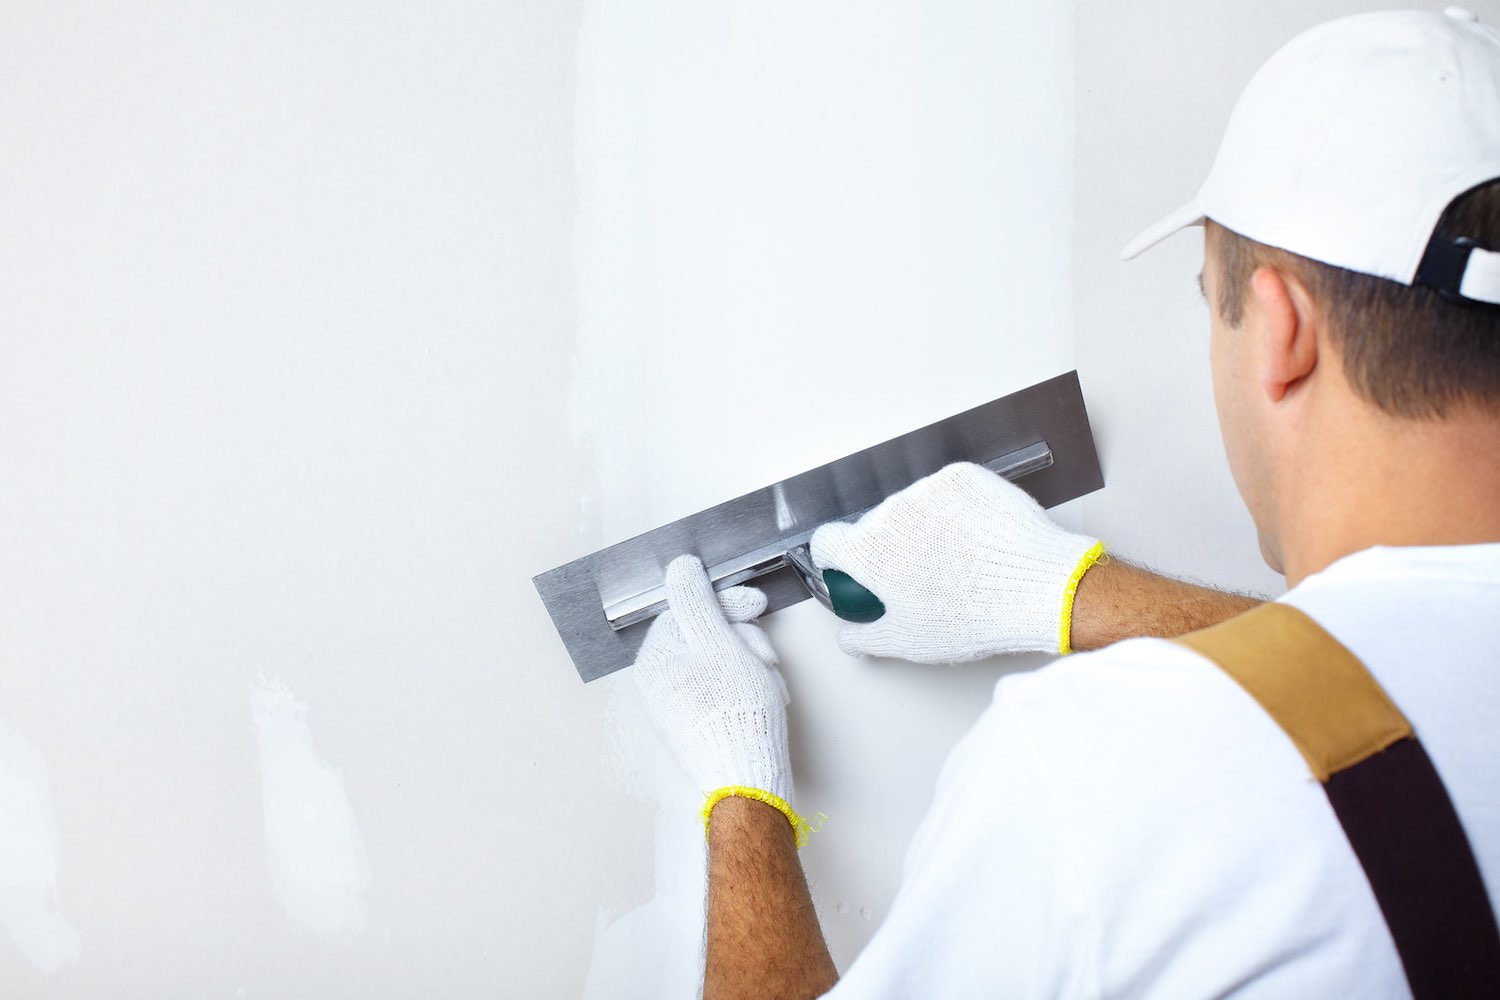 Finding the right plasterer is crucial. Here are some tips on how to find the plasterer that best suits your needs.